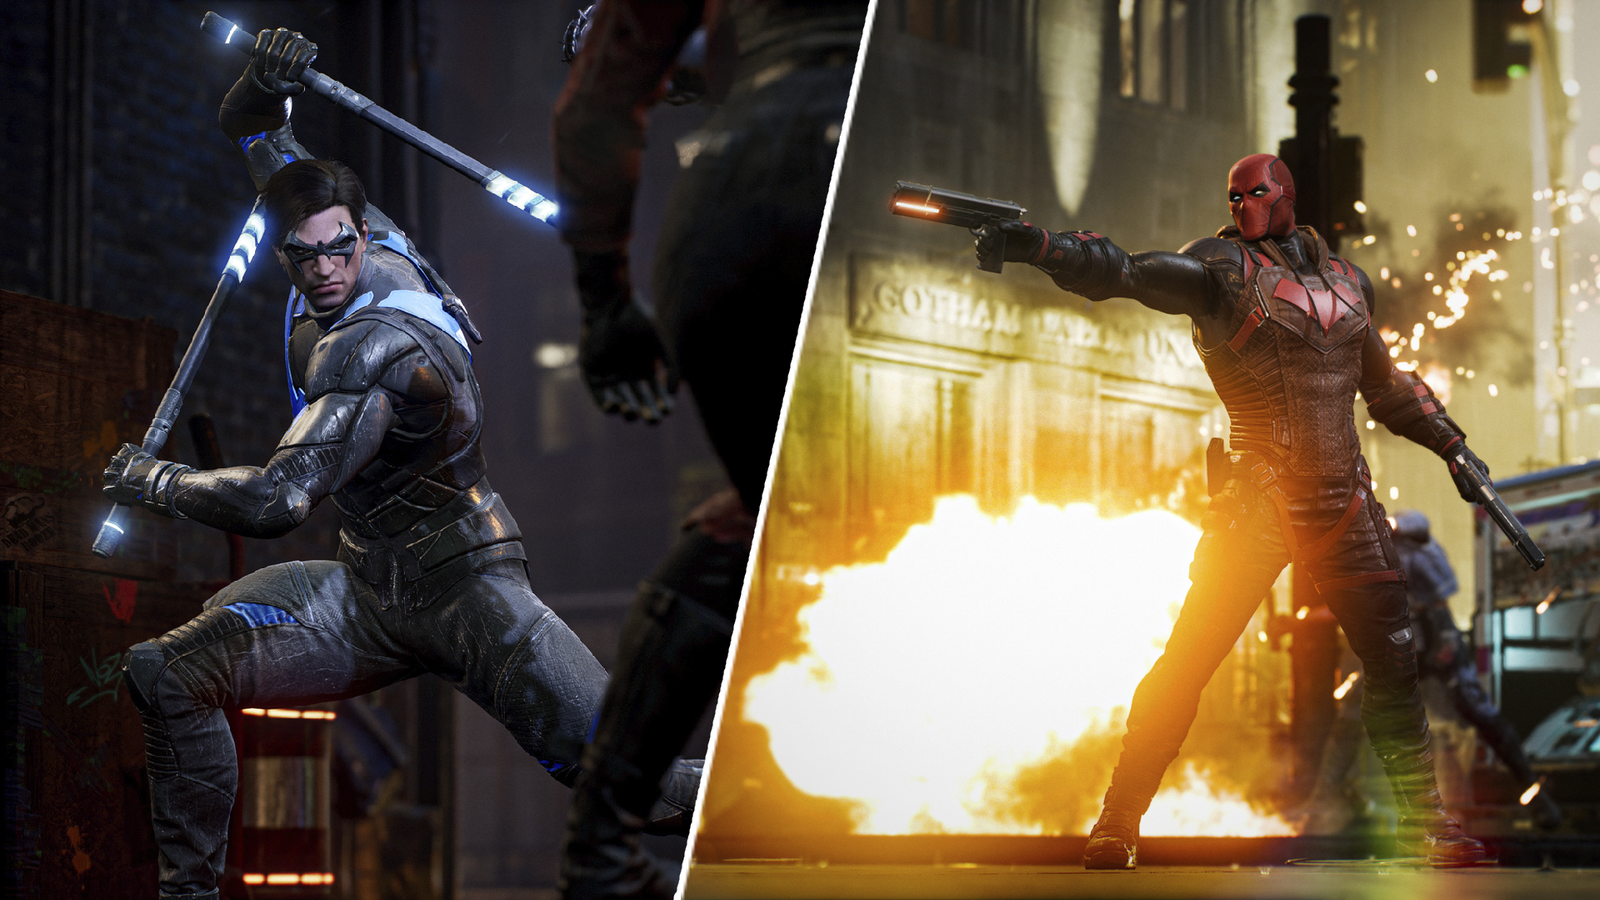 Gotham Knights Will Only Be Available On Next-Gen Consoles